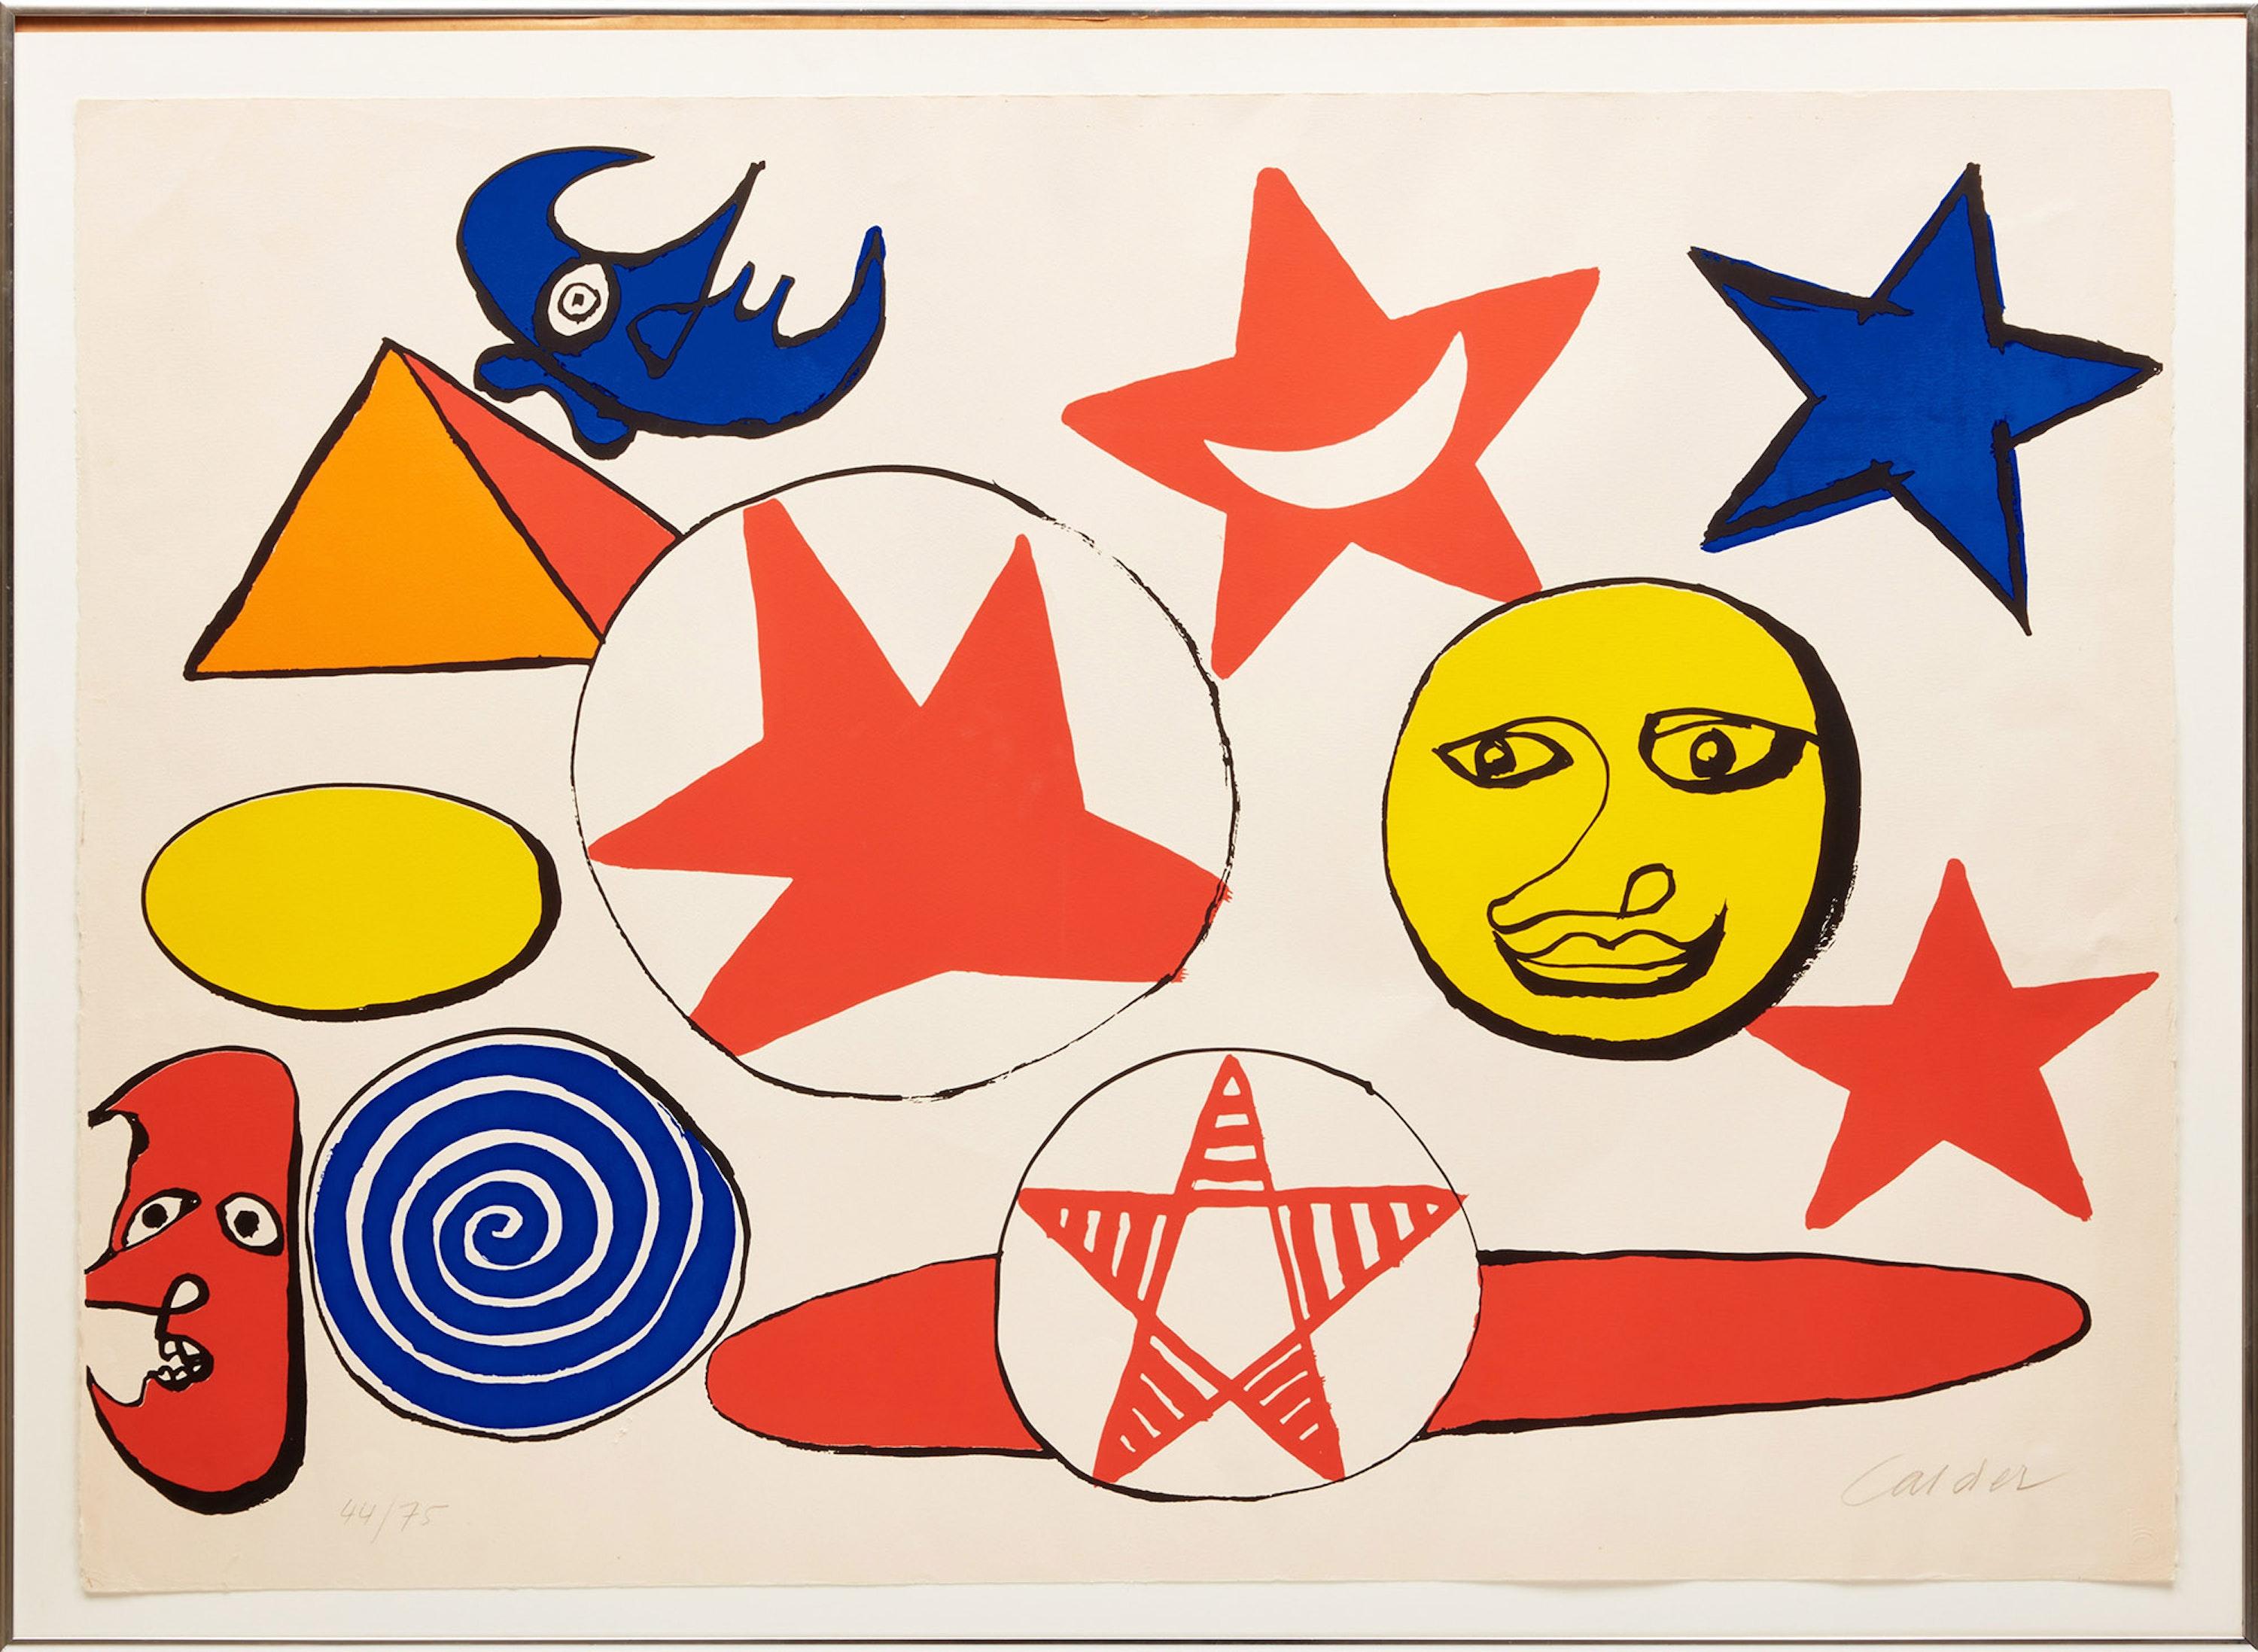 Lithograph in colors on Arches paper
Published by George J. Goodstadt, Inc., Ridgefield, Connecticut (with their blindstamp) 
29.5 x 41.3 inches
Signed and numbered in pencil, edition of 75 copies
**Will ship unframed**

Alexander Calder was born in